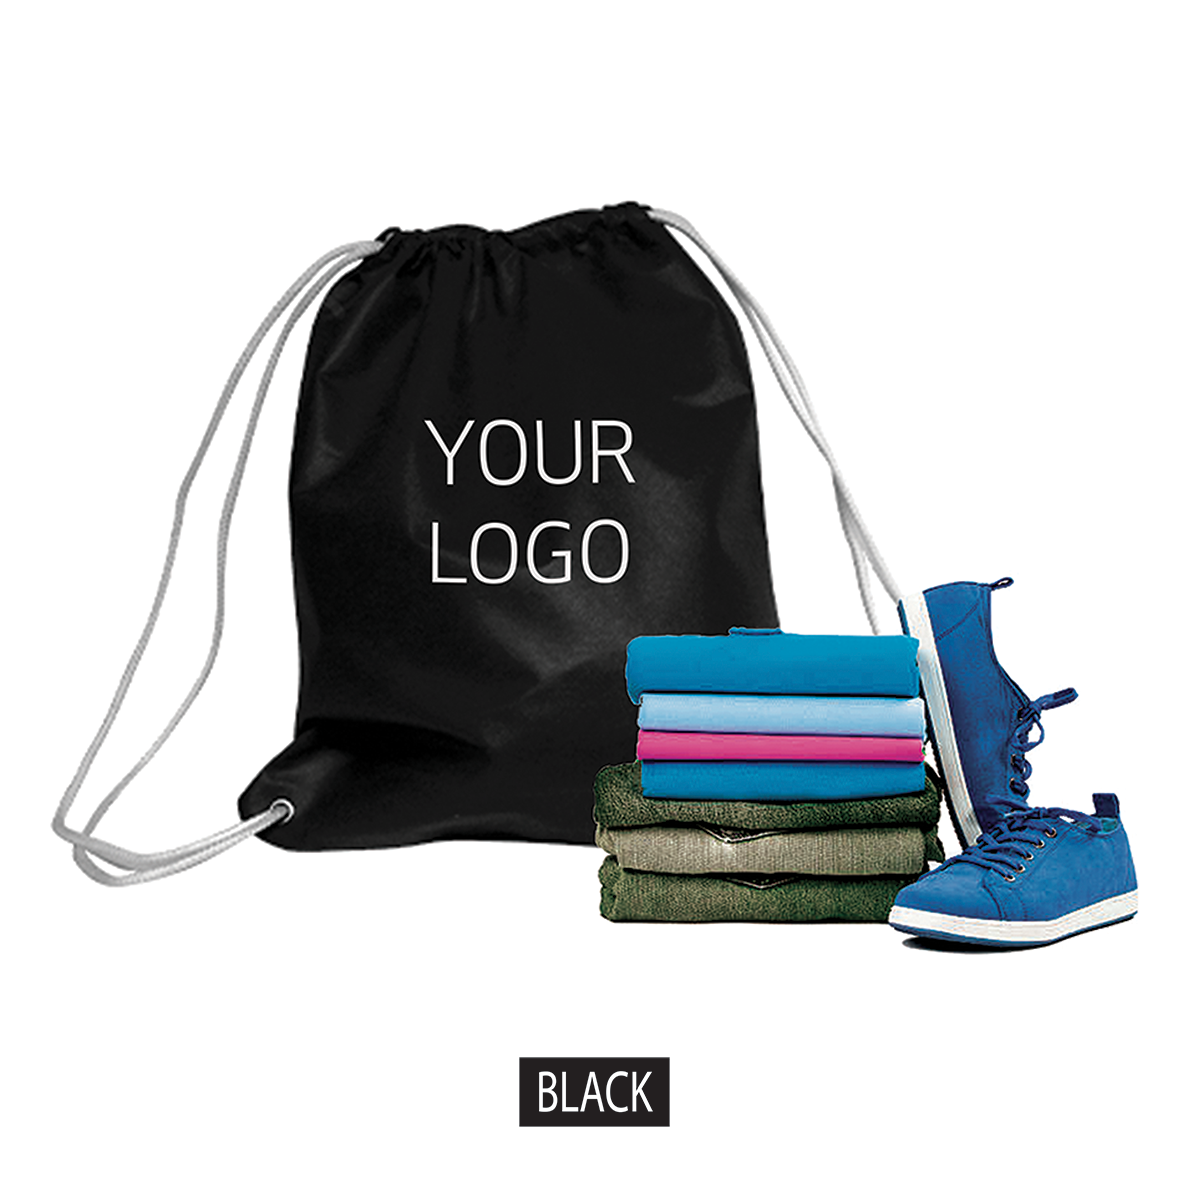 A black non-woven drawstring backpack with shoes and clothes